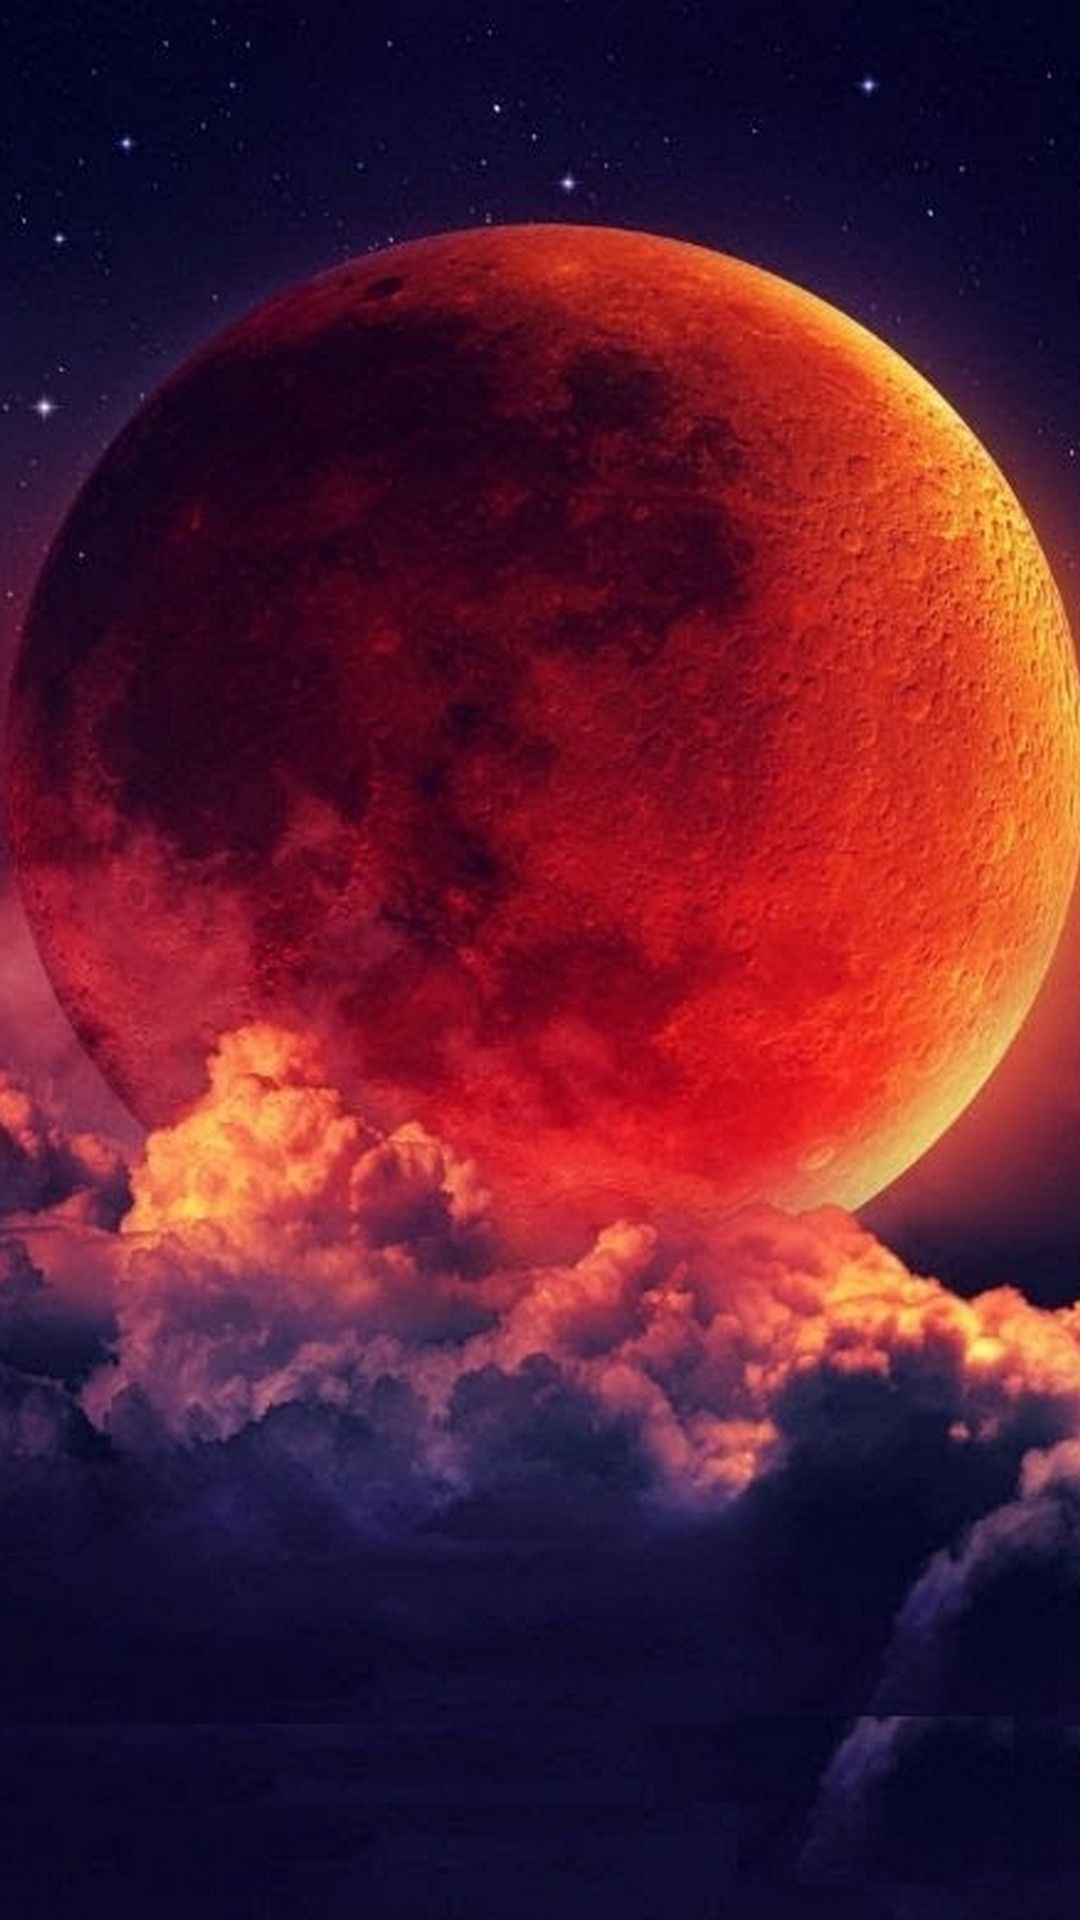 Blood Moon Wallpaper, Awesome Nature Blood Moon Wallpaper